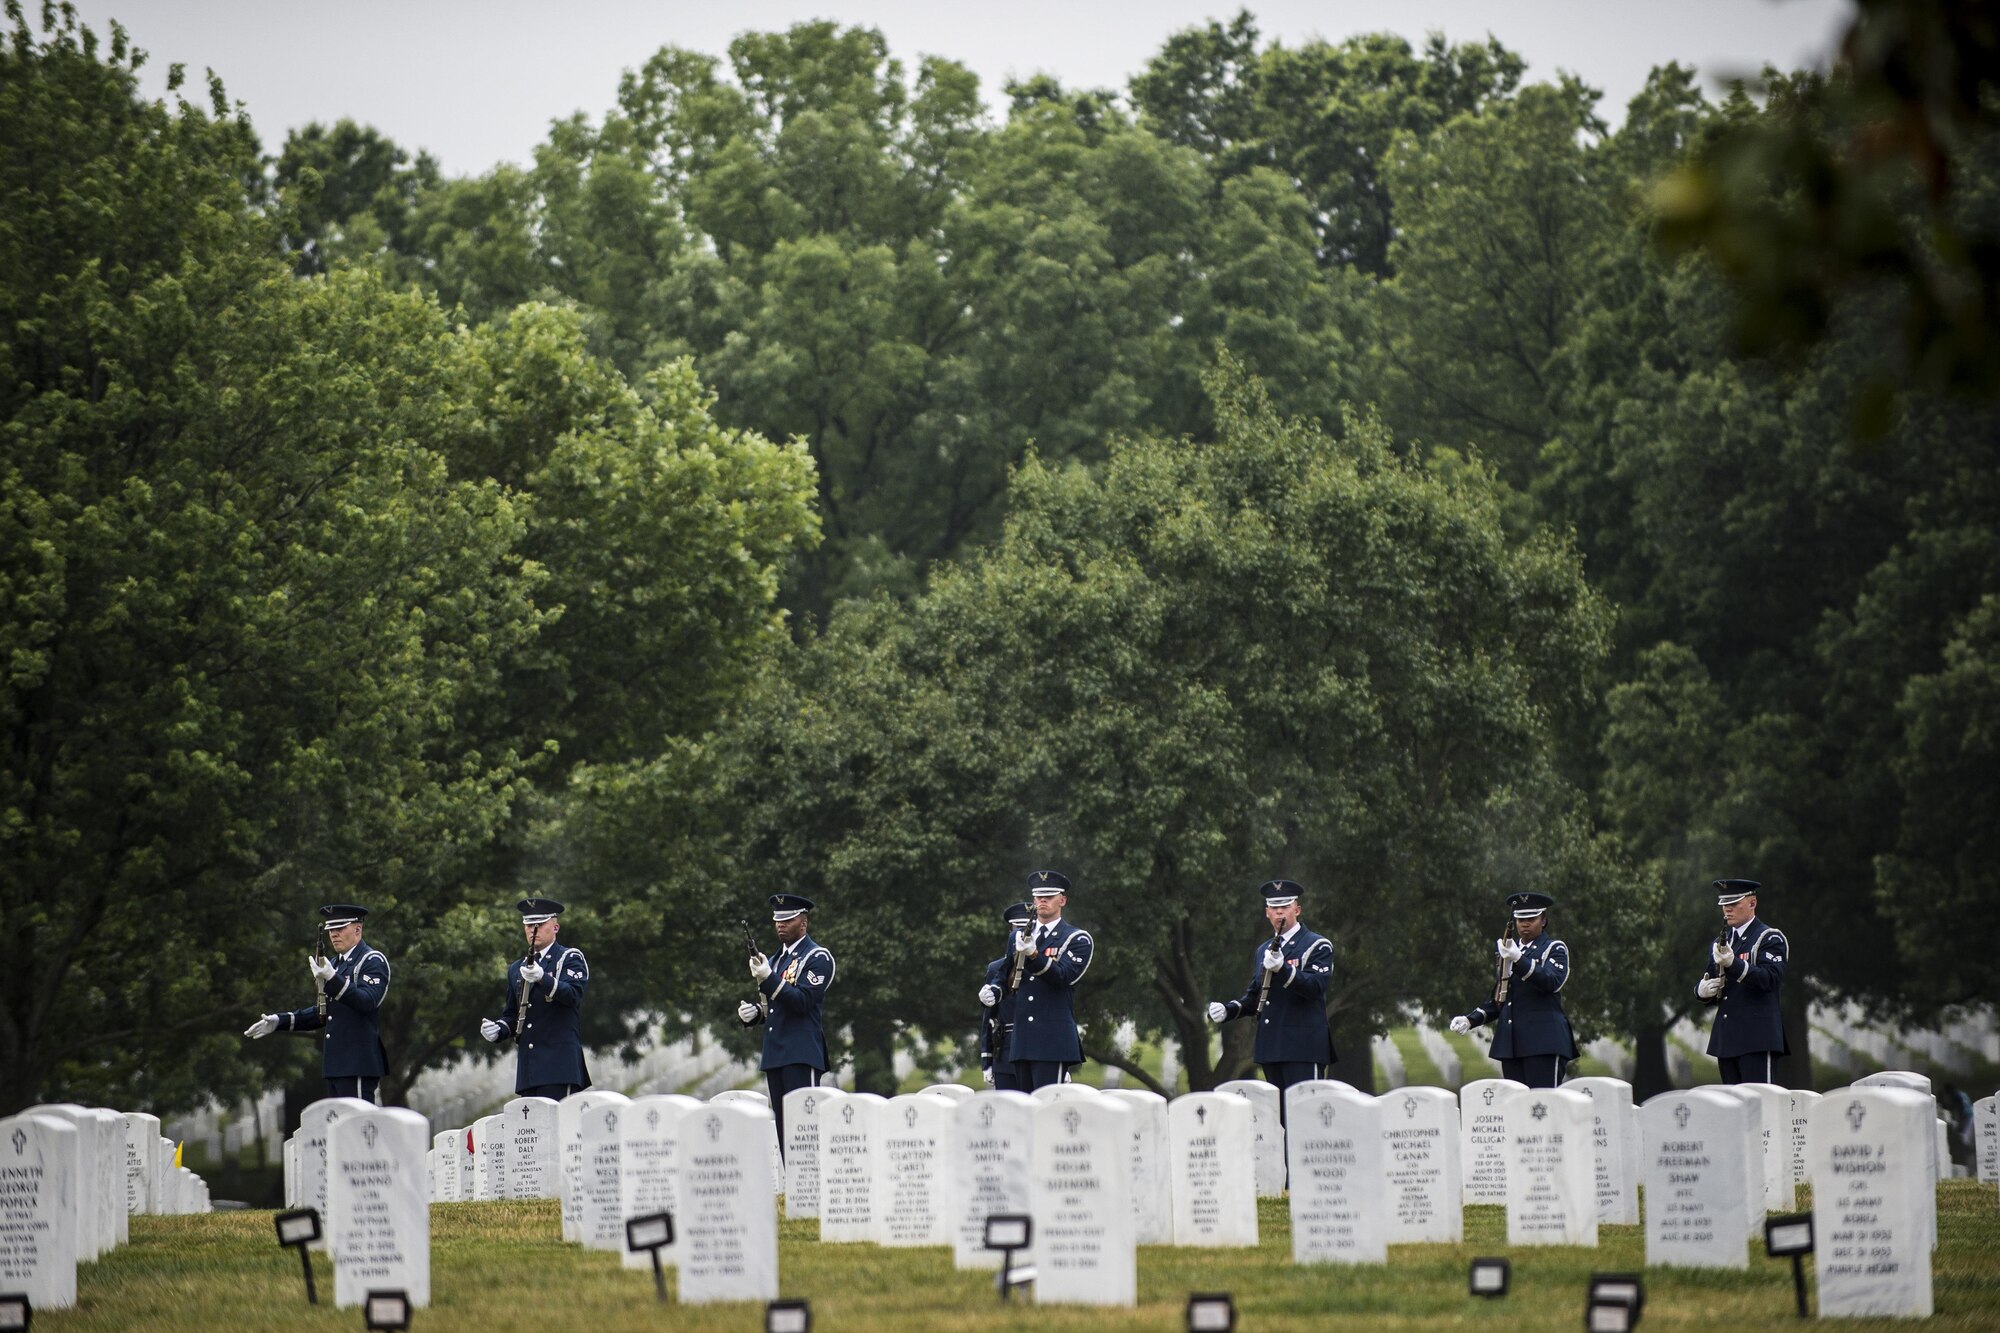 U.S. Air Force Honor Guard members fire a twenty-one gun salute during Lt. Col. William “Bill” Schroeder’s interment ceremony, June 16, 2016, at Arlington National Cemetery, Virginia. Schroeder, 39, was a special operations weather officer who identified a perilous situation and reacted swiftly by putting himself between an armed individual and his first sergeant. In the process, he saved lives of other squadron members while being fatally wounded. (U.S. Air Force photo by Airman 1st Class Philip Bryant)